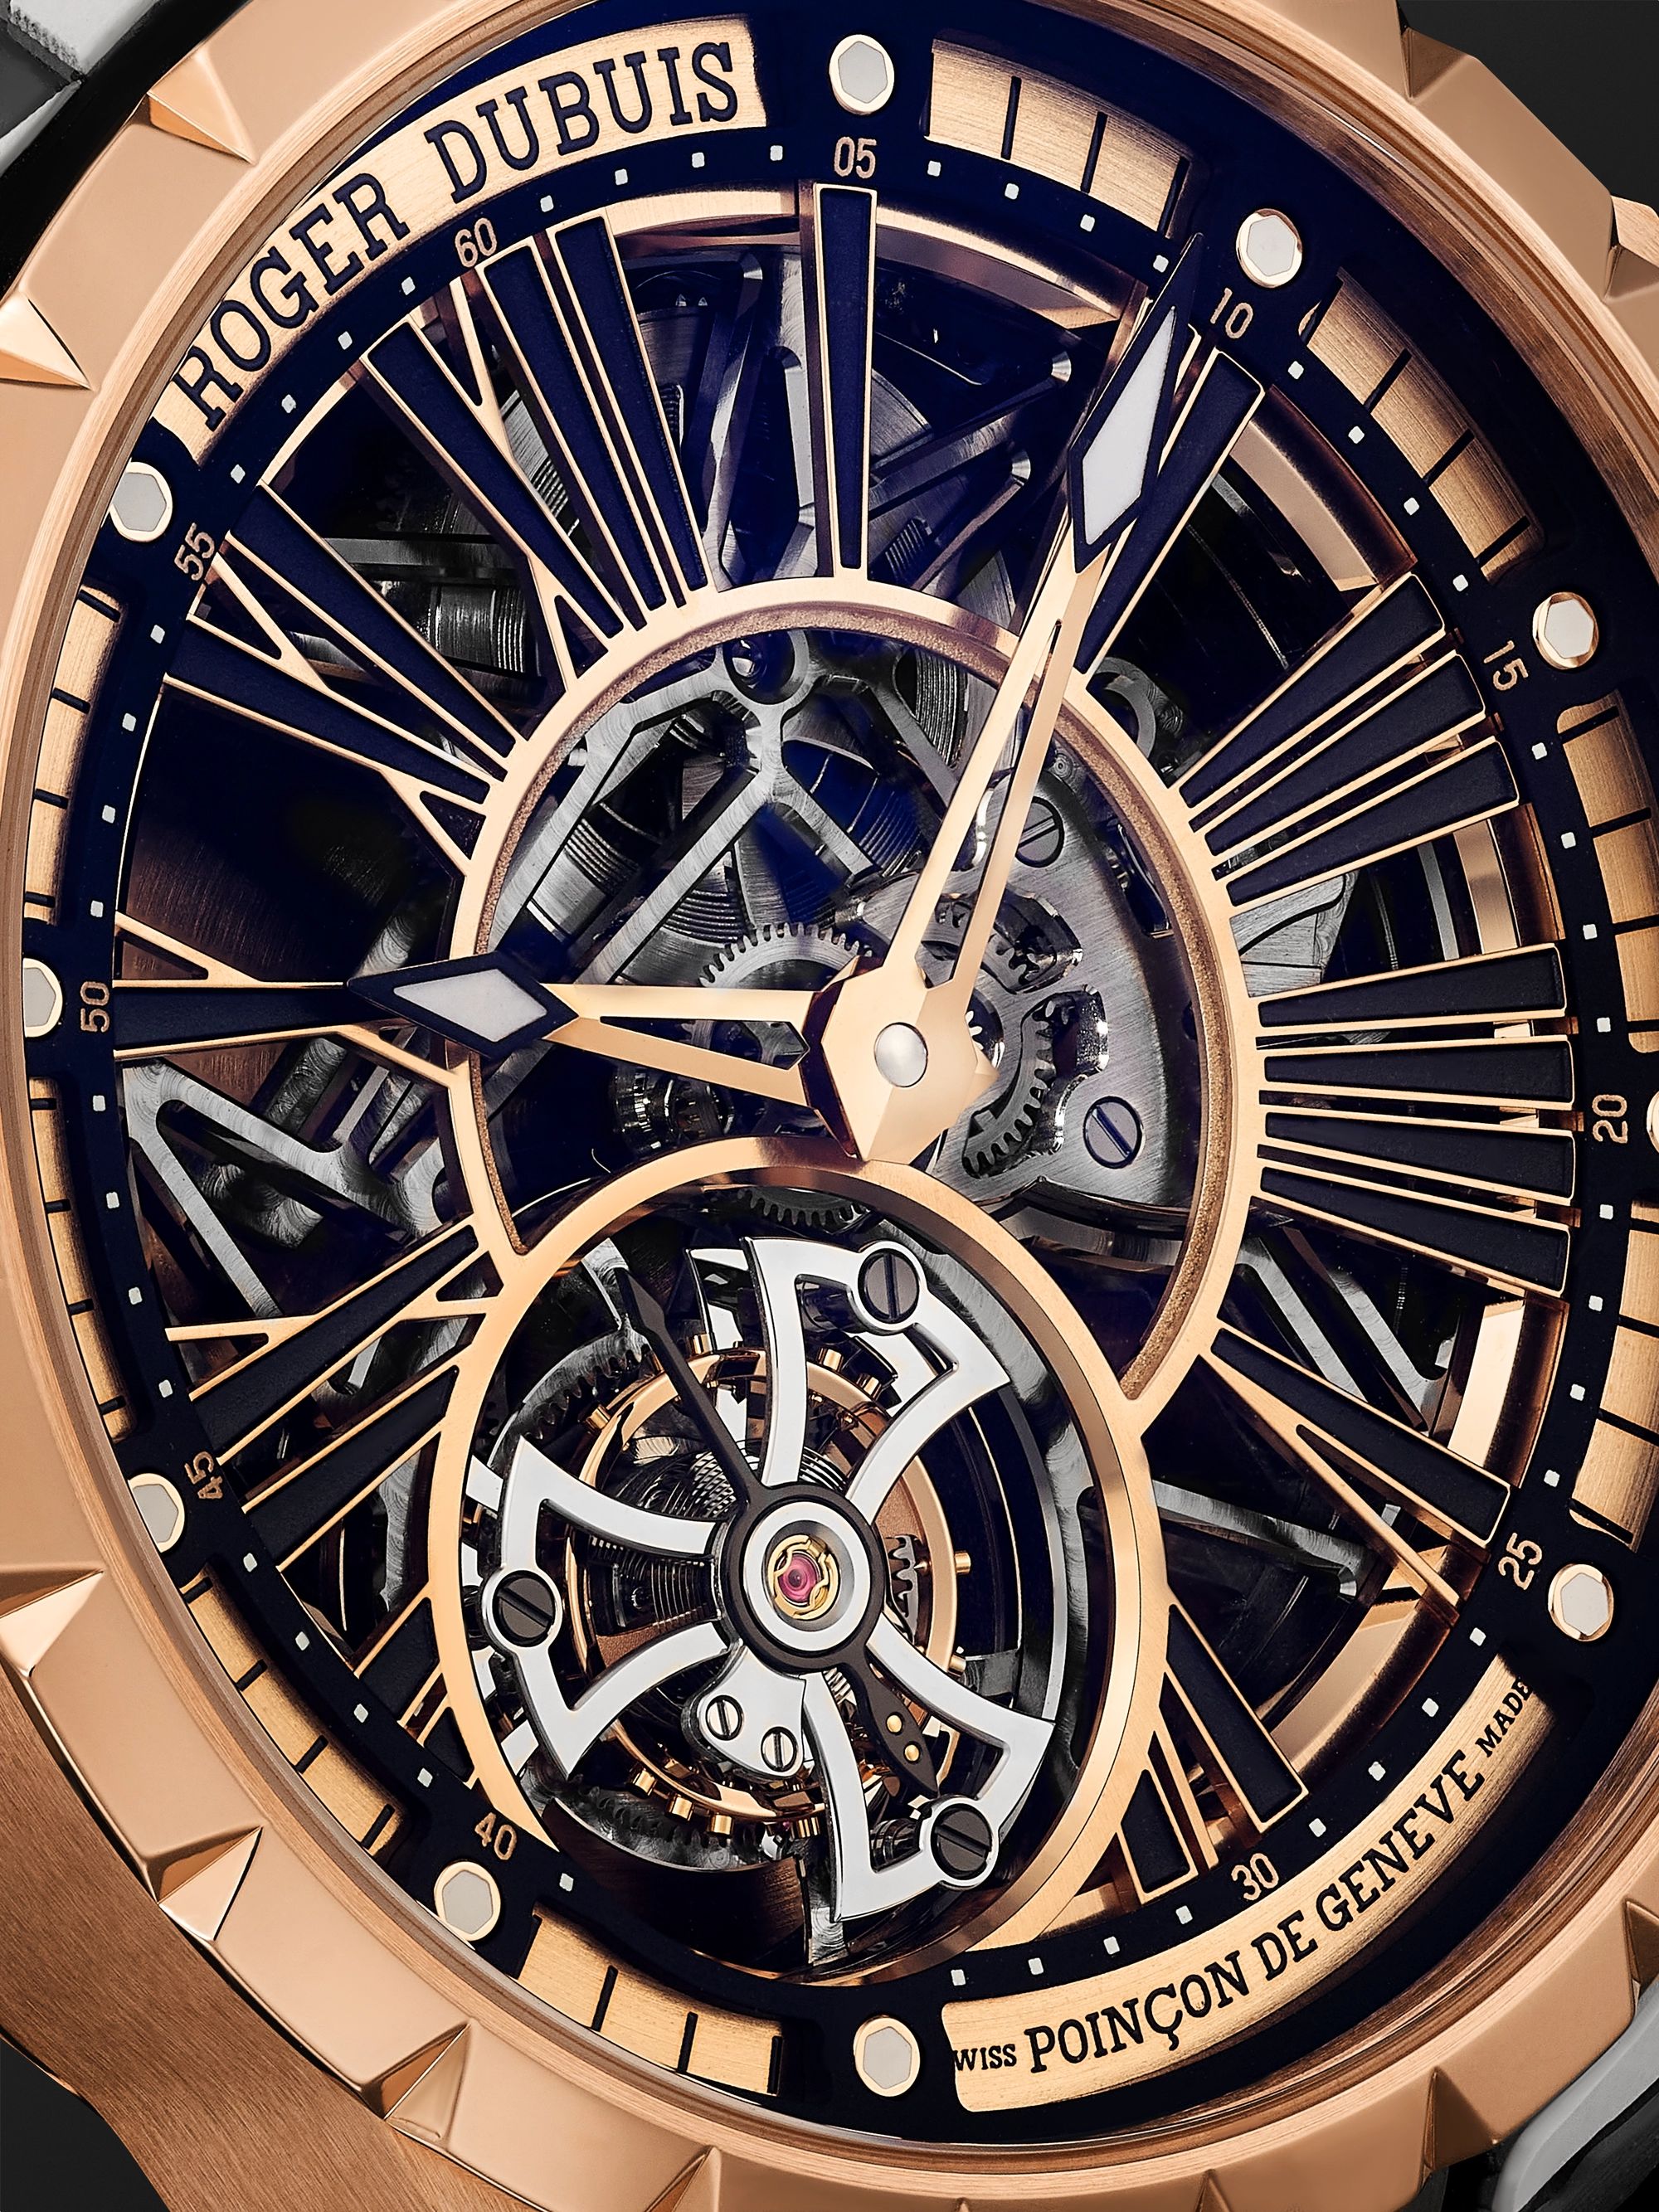 ROGER DUBUIS Excalibur 45 Limited Edition Automatic Skeleton 45mm 18-Karat Pink Gold and Rubber Watch, Ref. No. RDDBEX0904